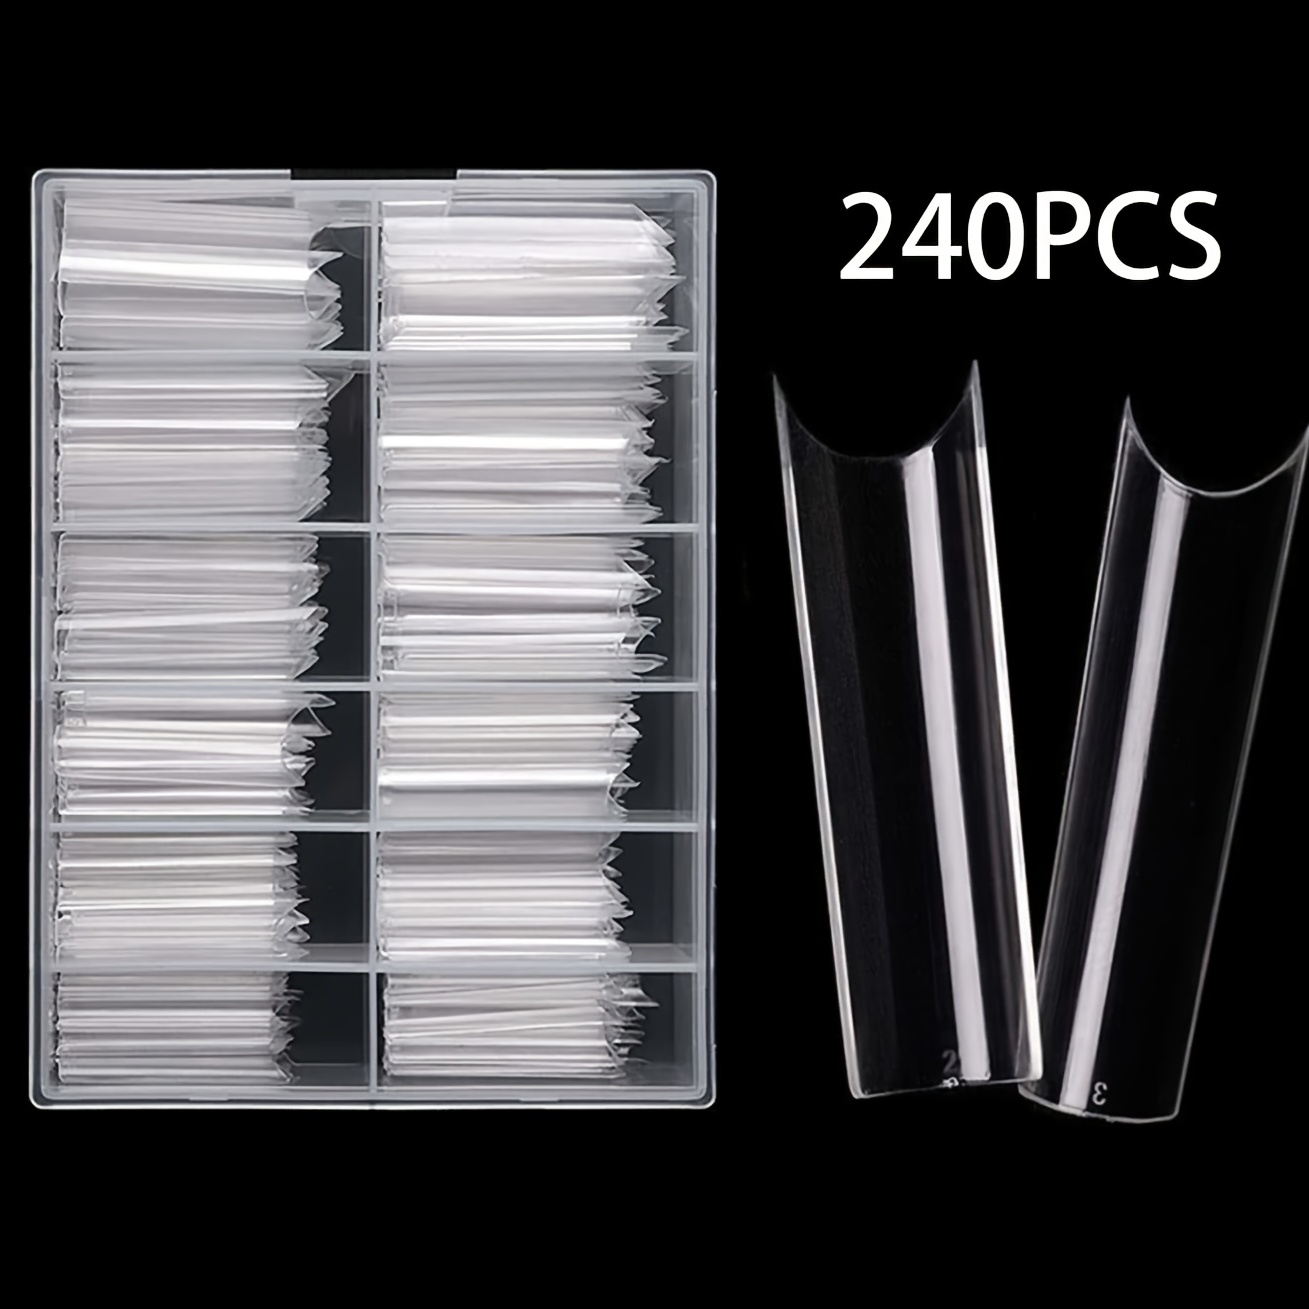 

240pcs Soft Gel Nail Tips, Clear Acrylic Nail Tips Half Cover C Curved Coffin False Nail Tips For Nail Extension Manicure Tools For Nail Art Diy